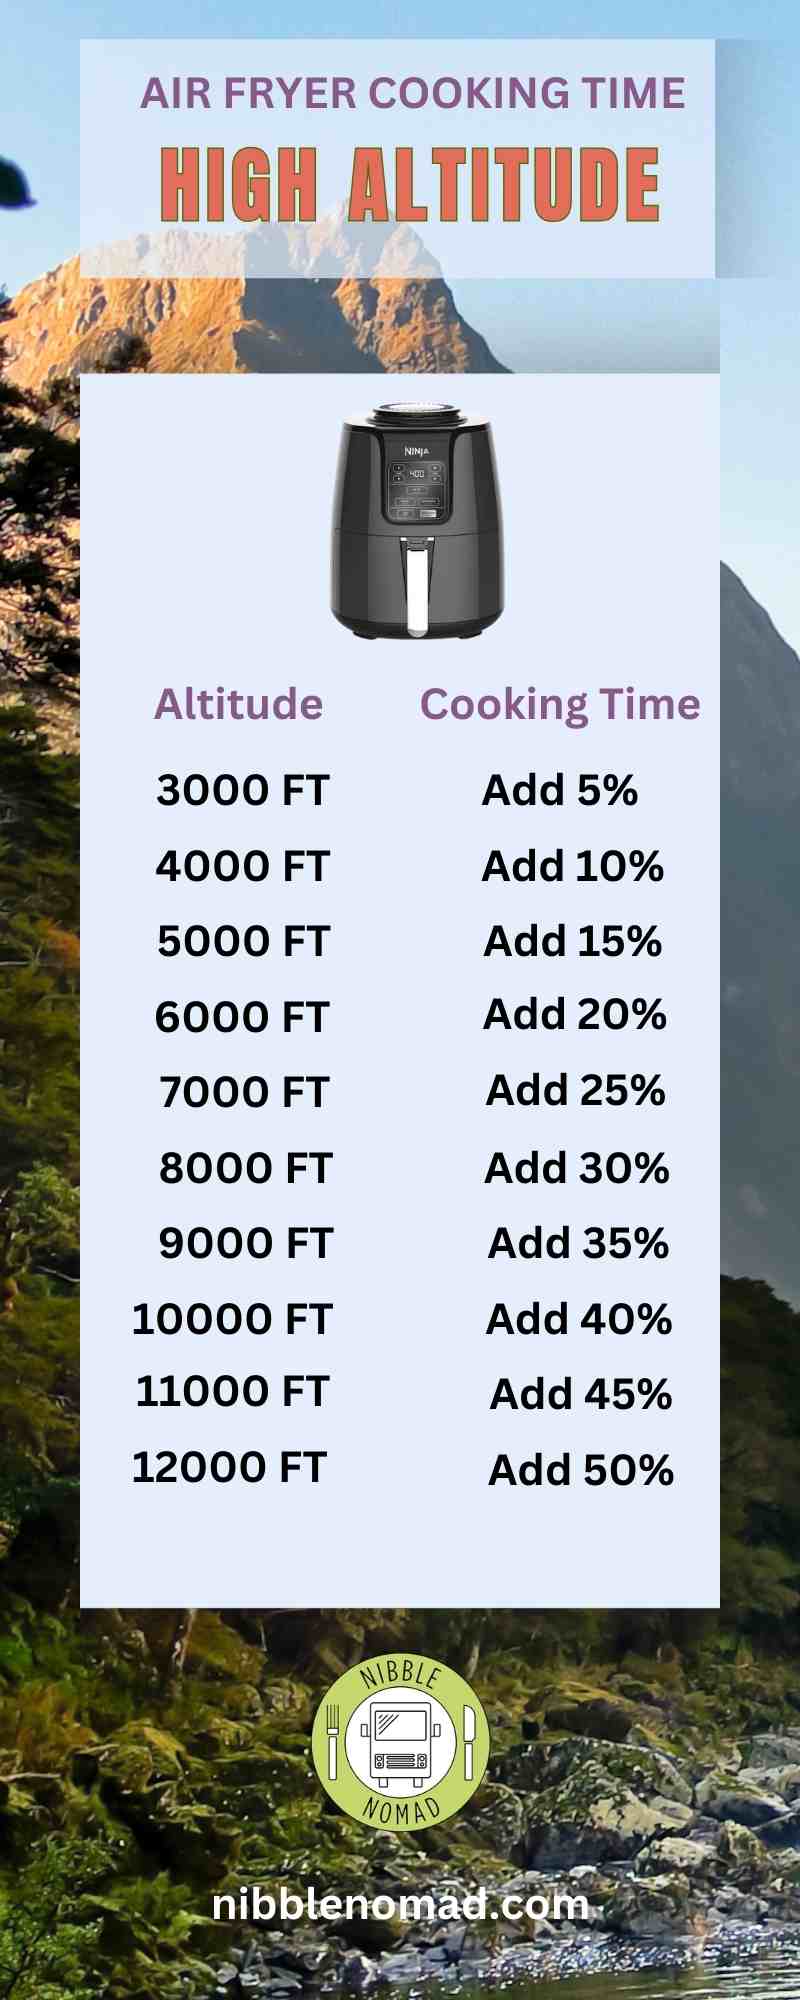 Quick altitude cooking chart